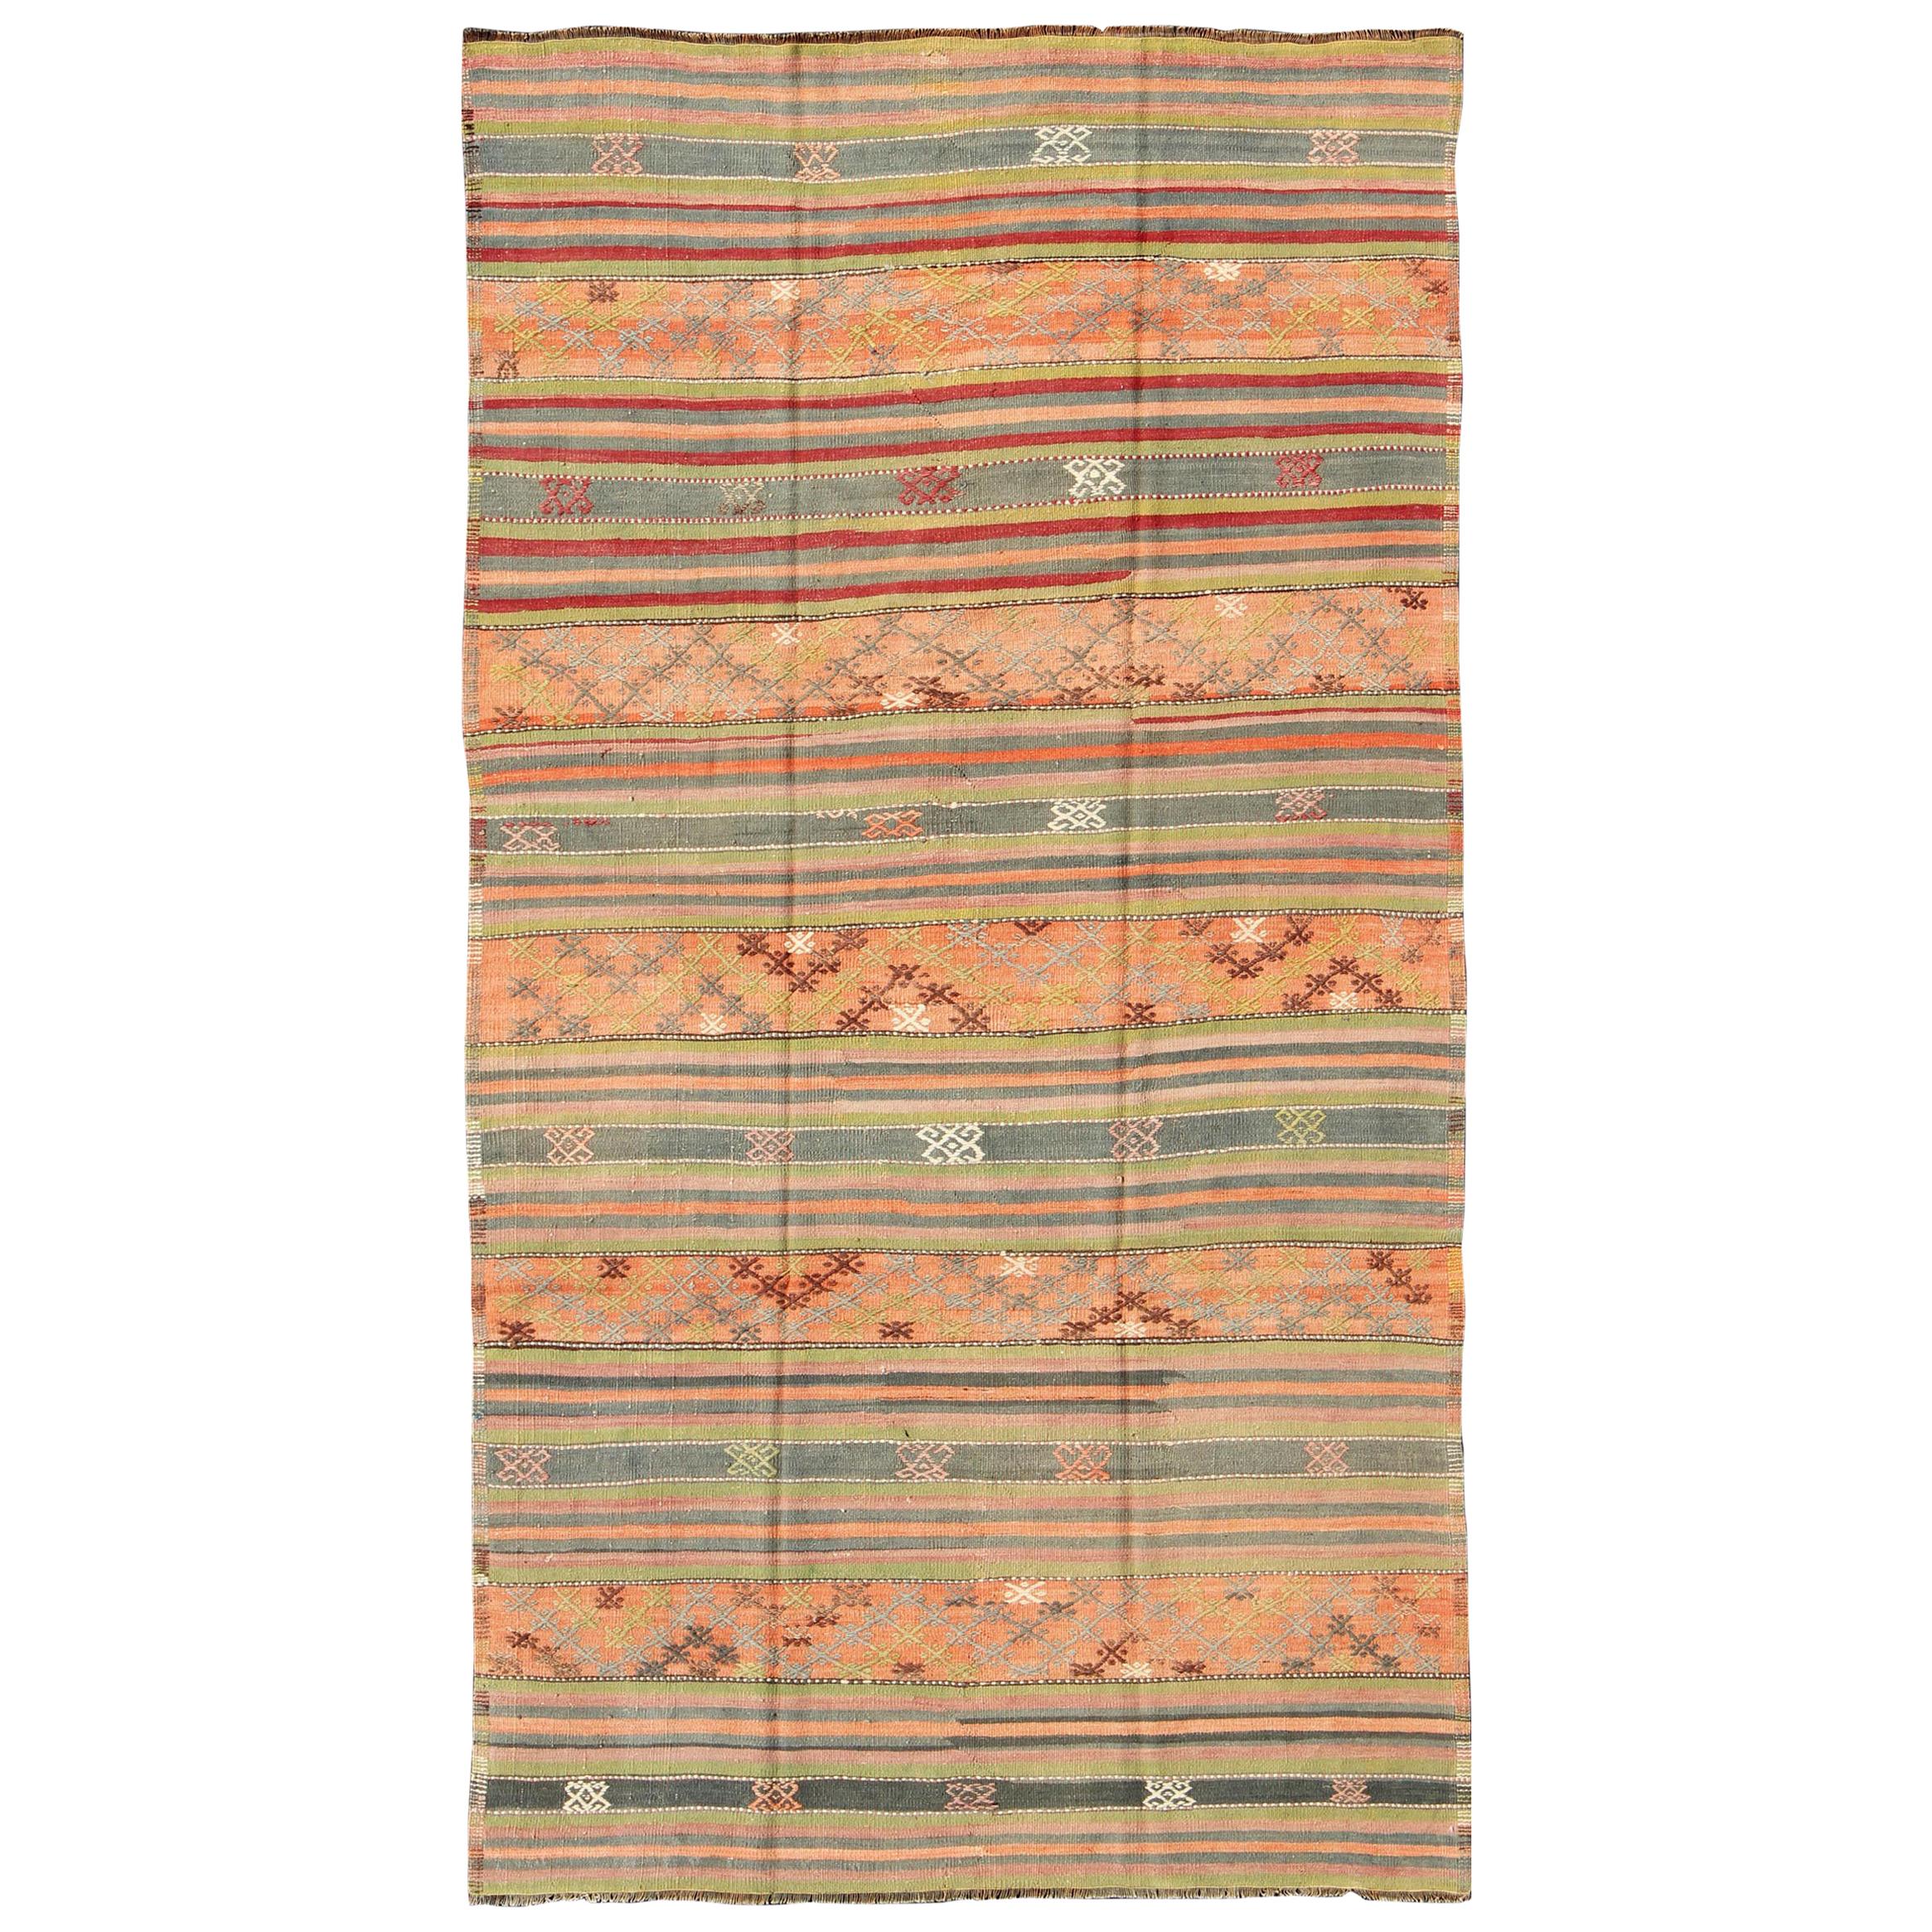 Vintage Turkish Kilim Rug with Geometric Shapes and Colorful Stripes